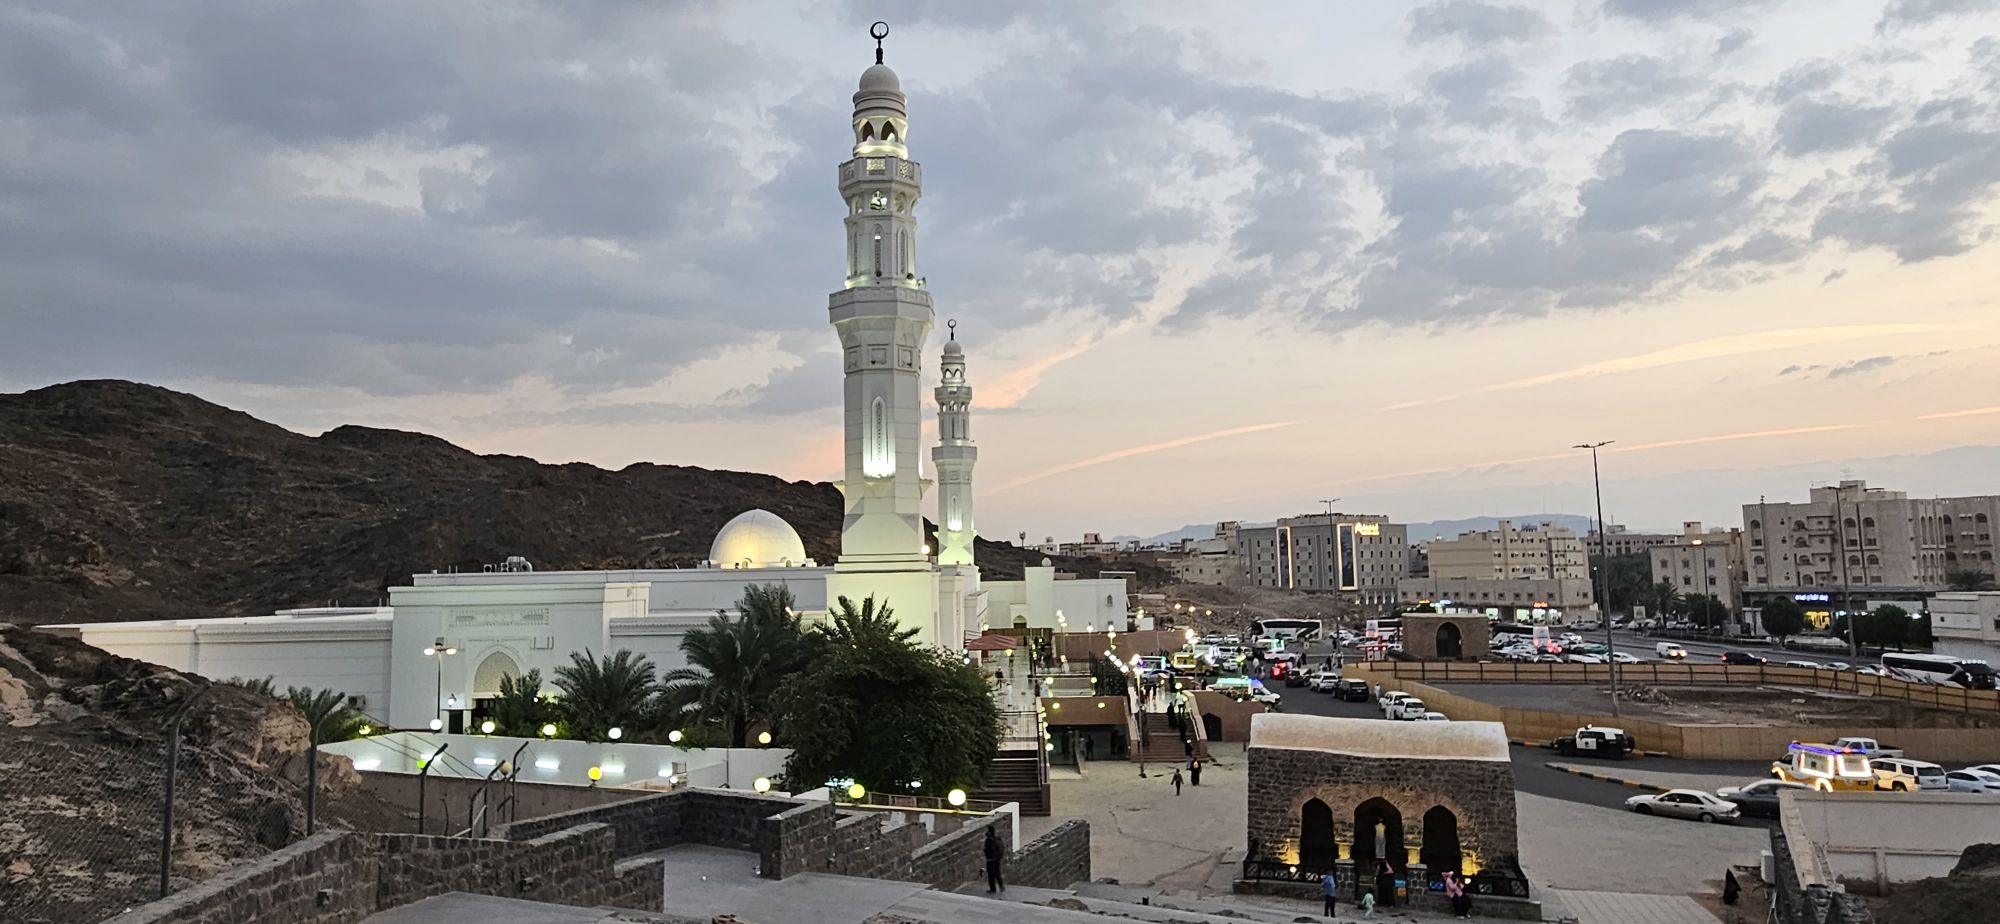 The Seven Mosques in Medina